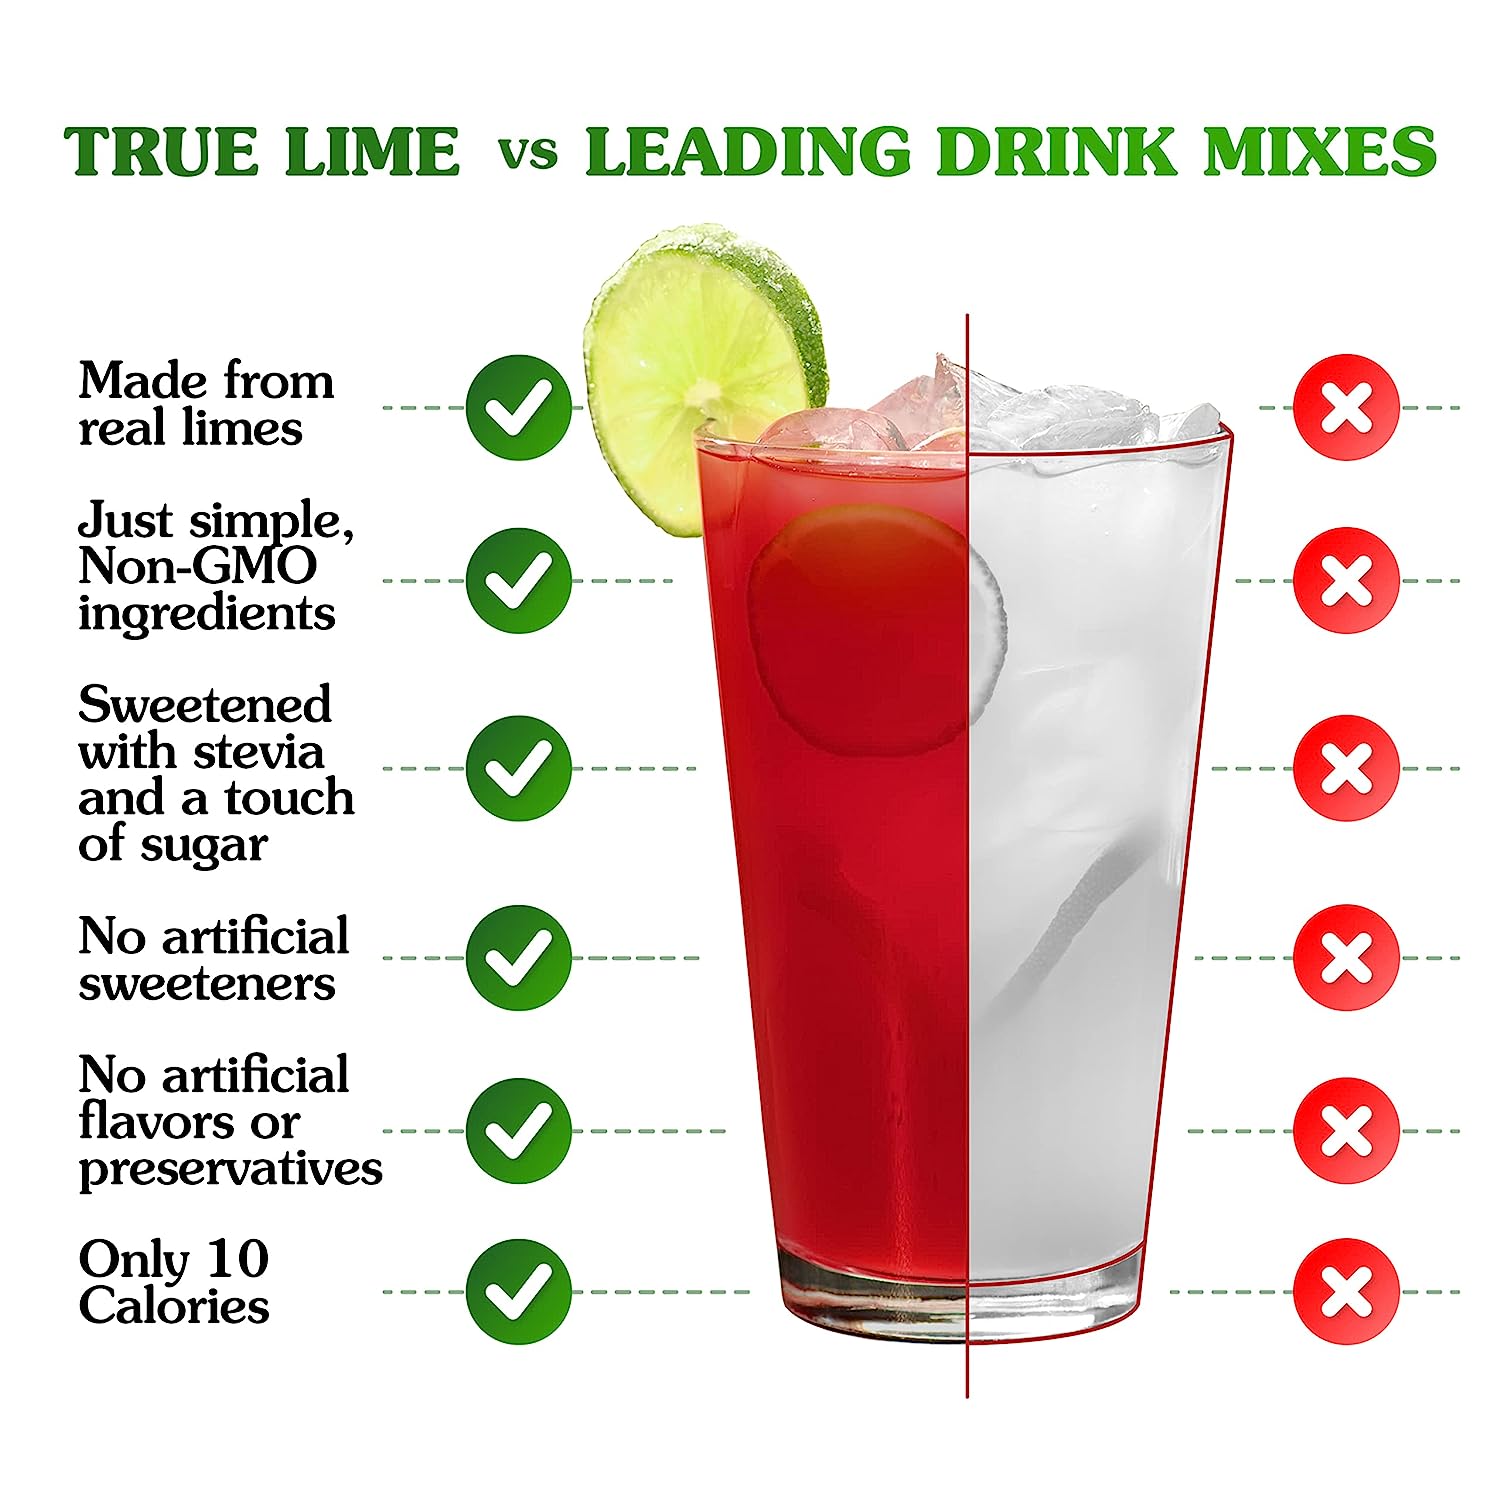 TRUE LIME Black Cherry Limeade Drink Mix (10 Packets) | Made from Real Limes | No Preservatives, No Artificial Sweeteners, Gluten Free | Water Flavor Packets & Water Enhancer with Stevia